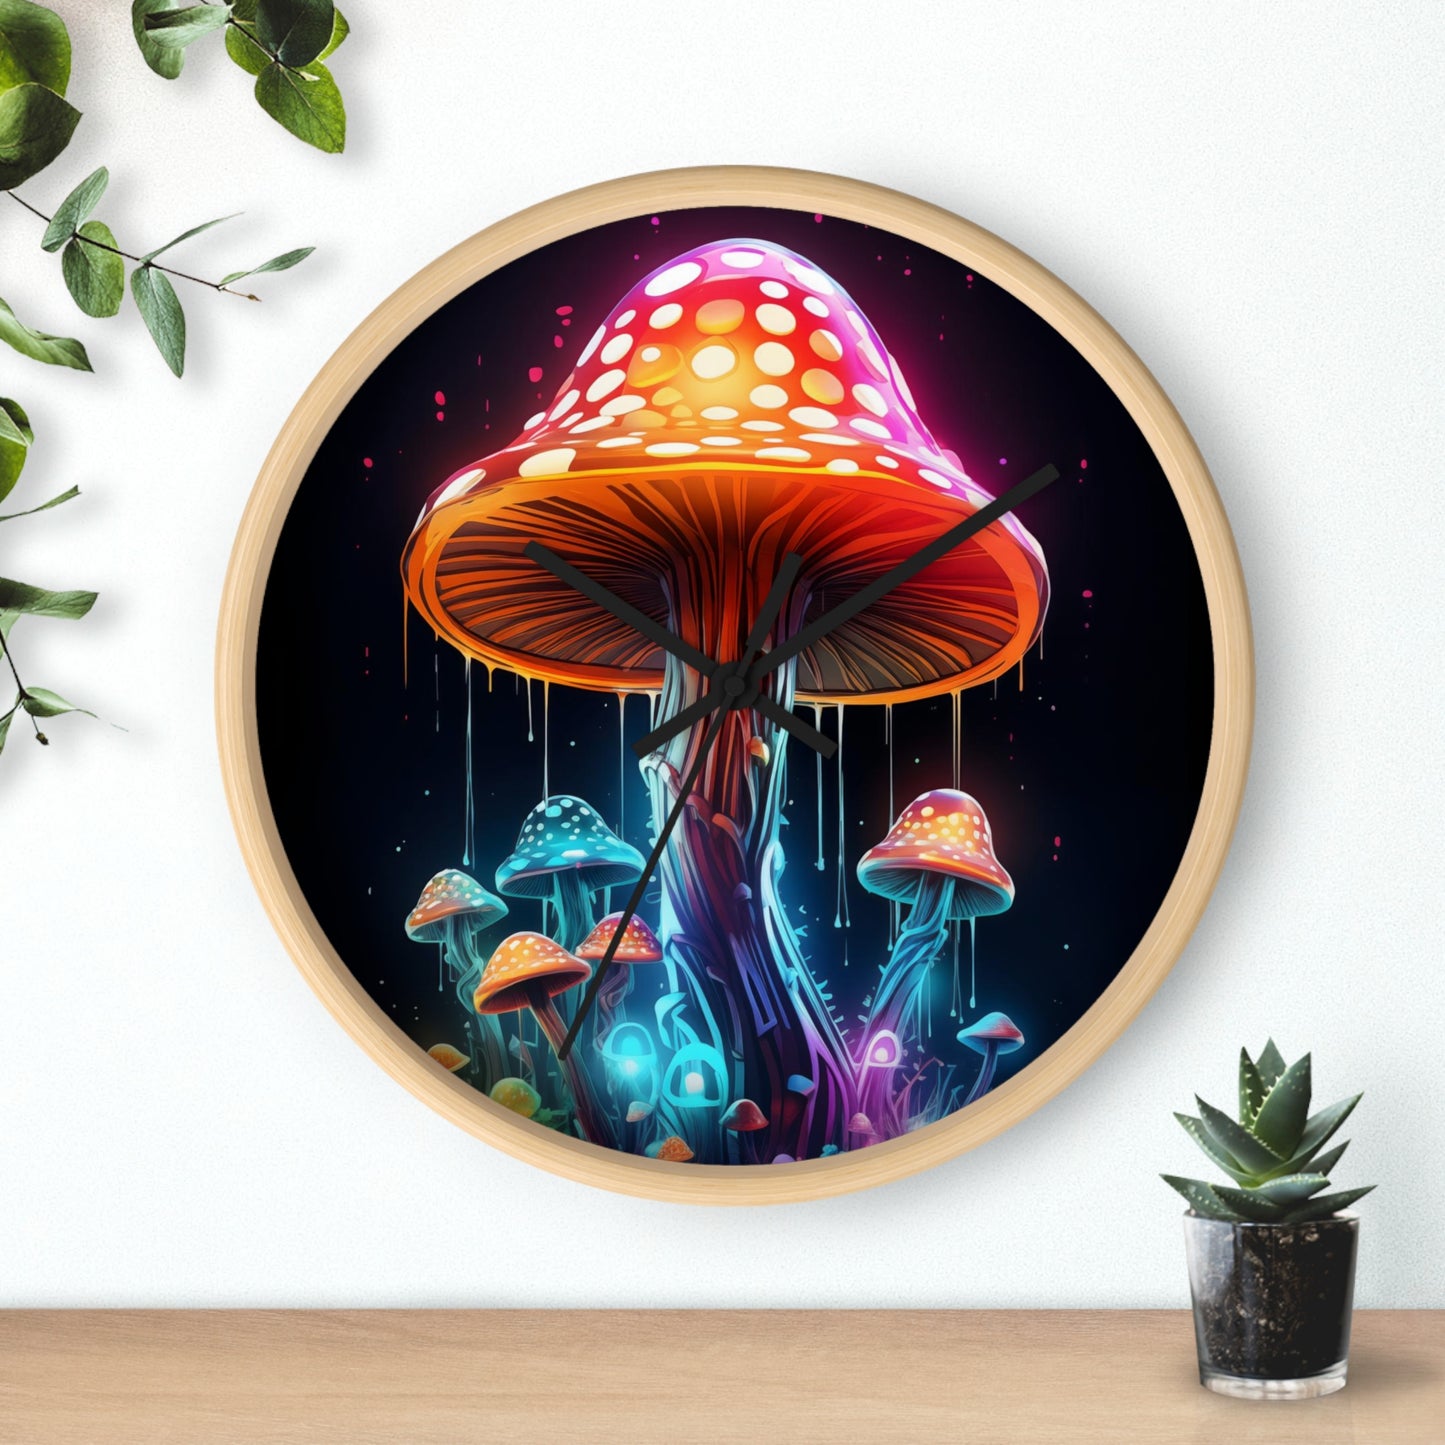 Neon Mushroom Wall Clock Incredible Vibrant Design and Colors, Awesome  Clock for any Dorm Room, College Gift, Neon Decor, Unique Clock